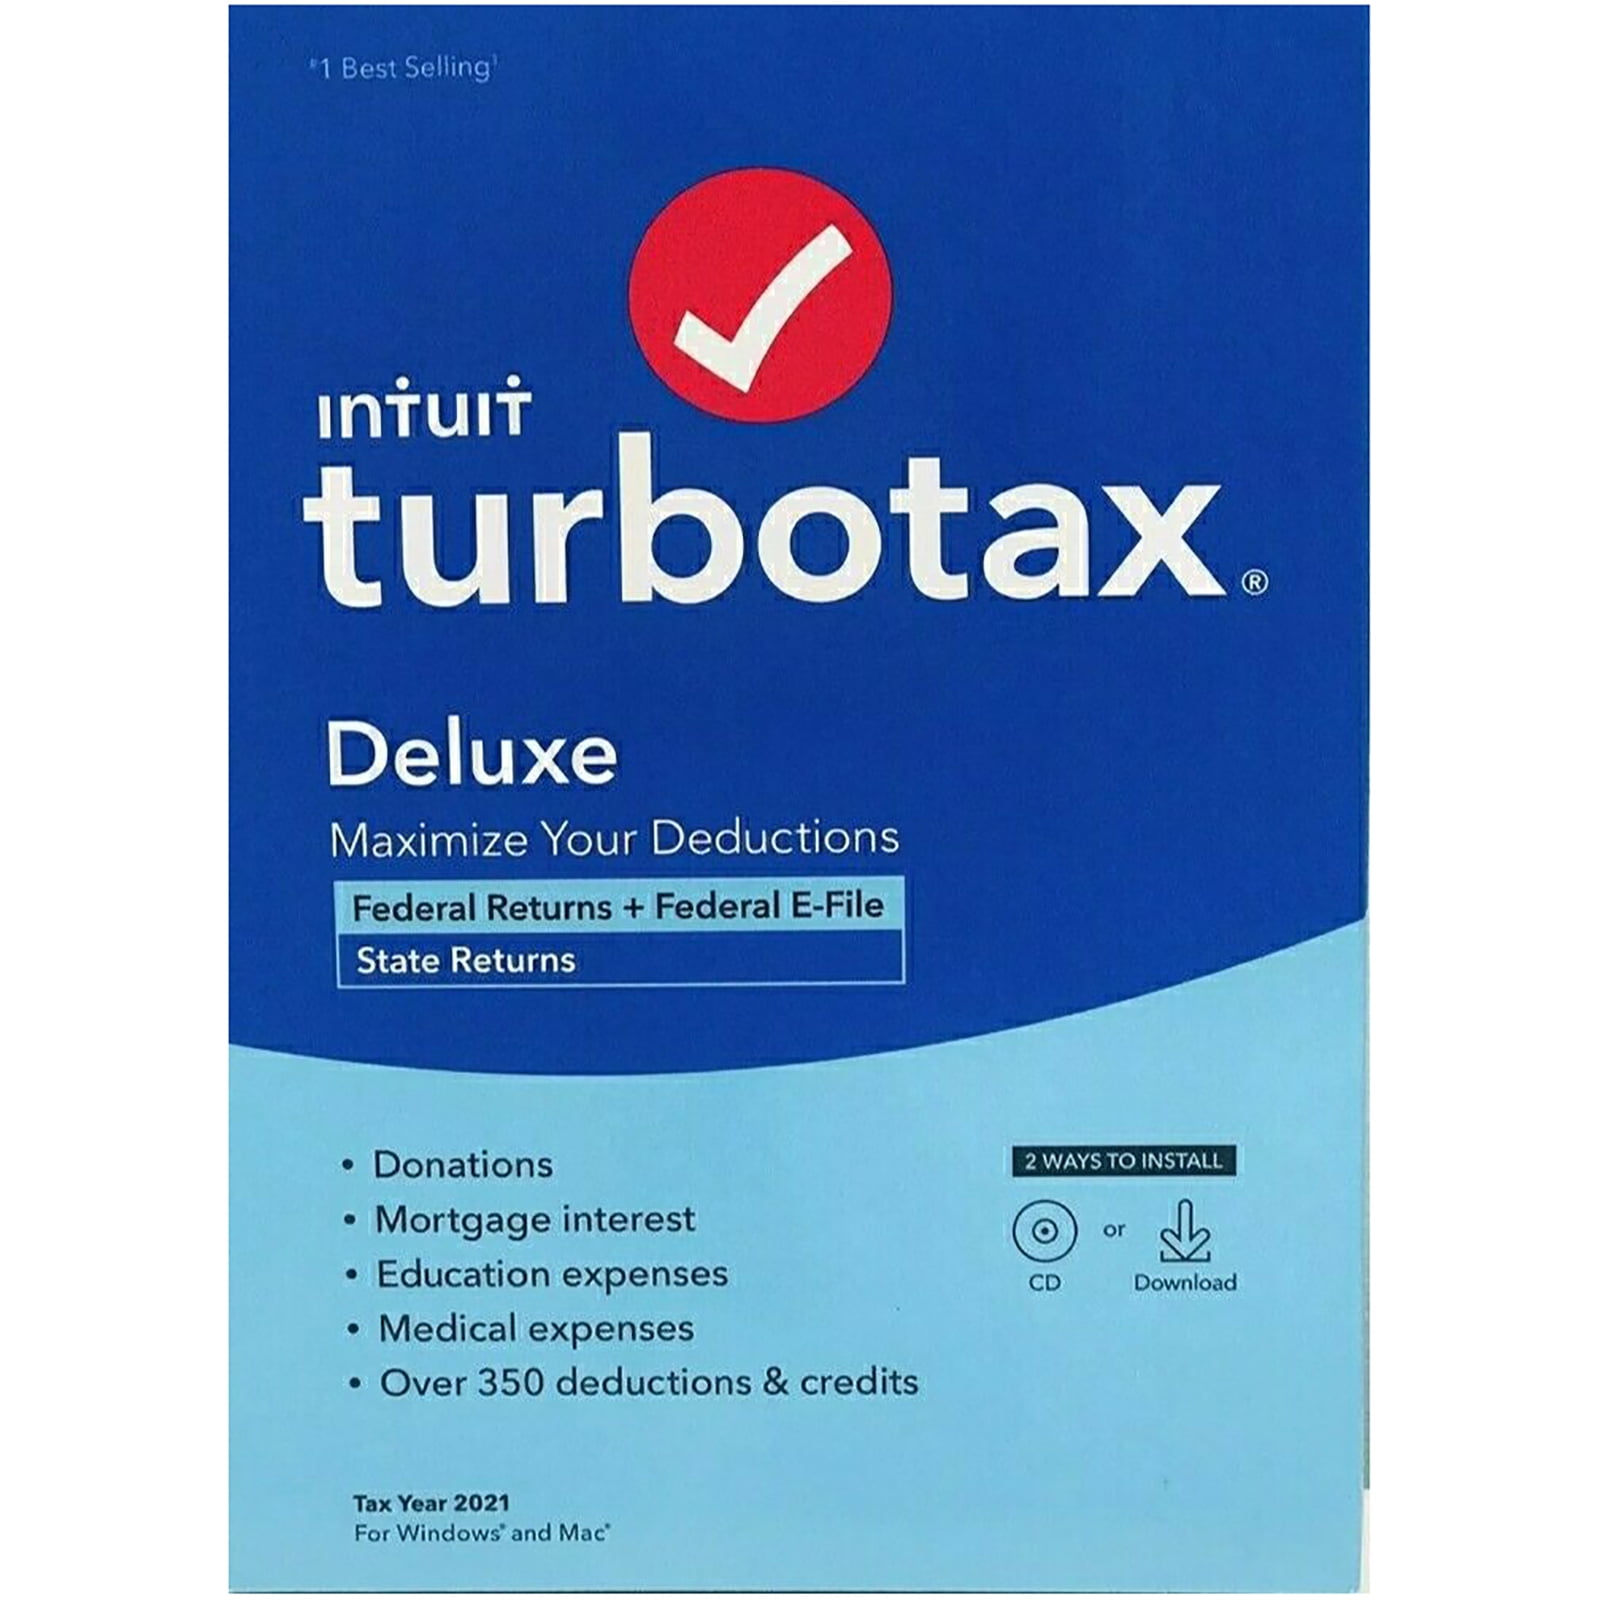 TurboTax Deluxe 2021 Tax Software, Federal and State Tax Return [PC/Mac Disc] - Physical Retail Box